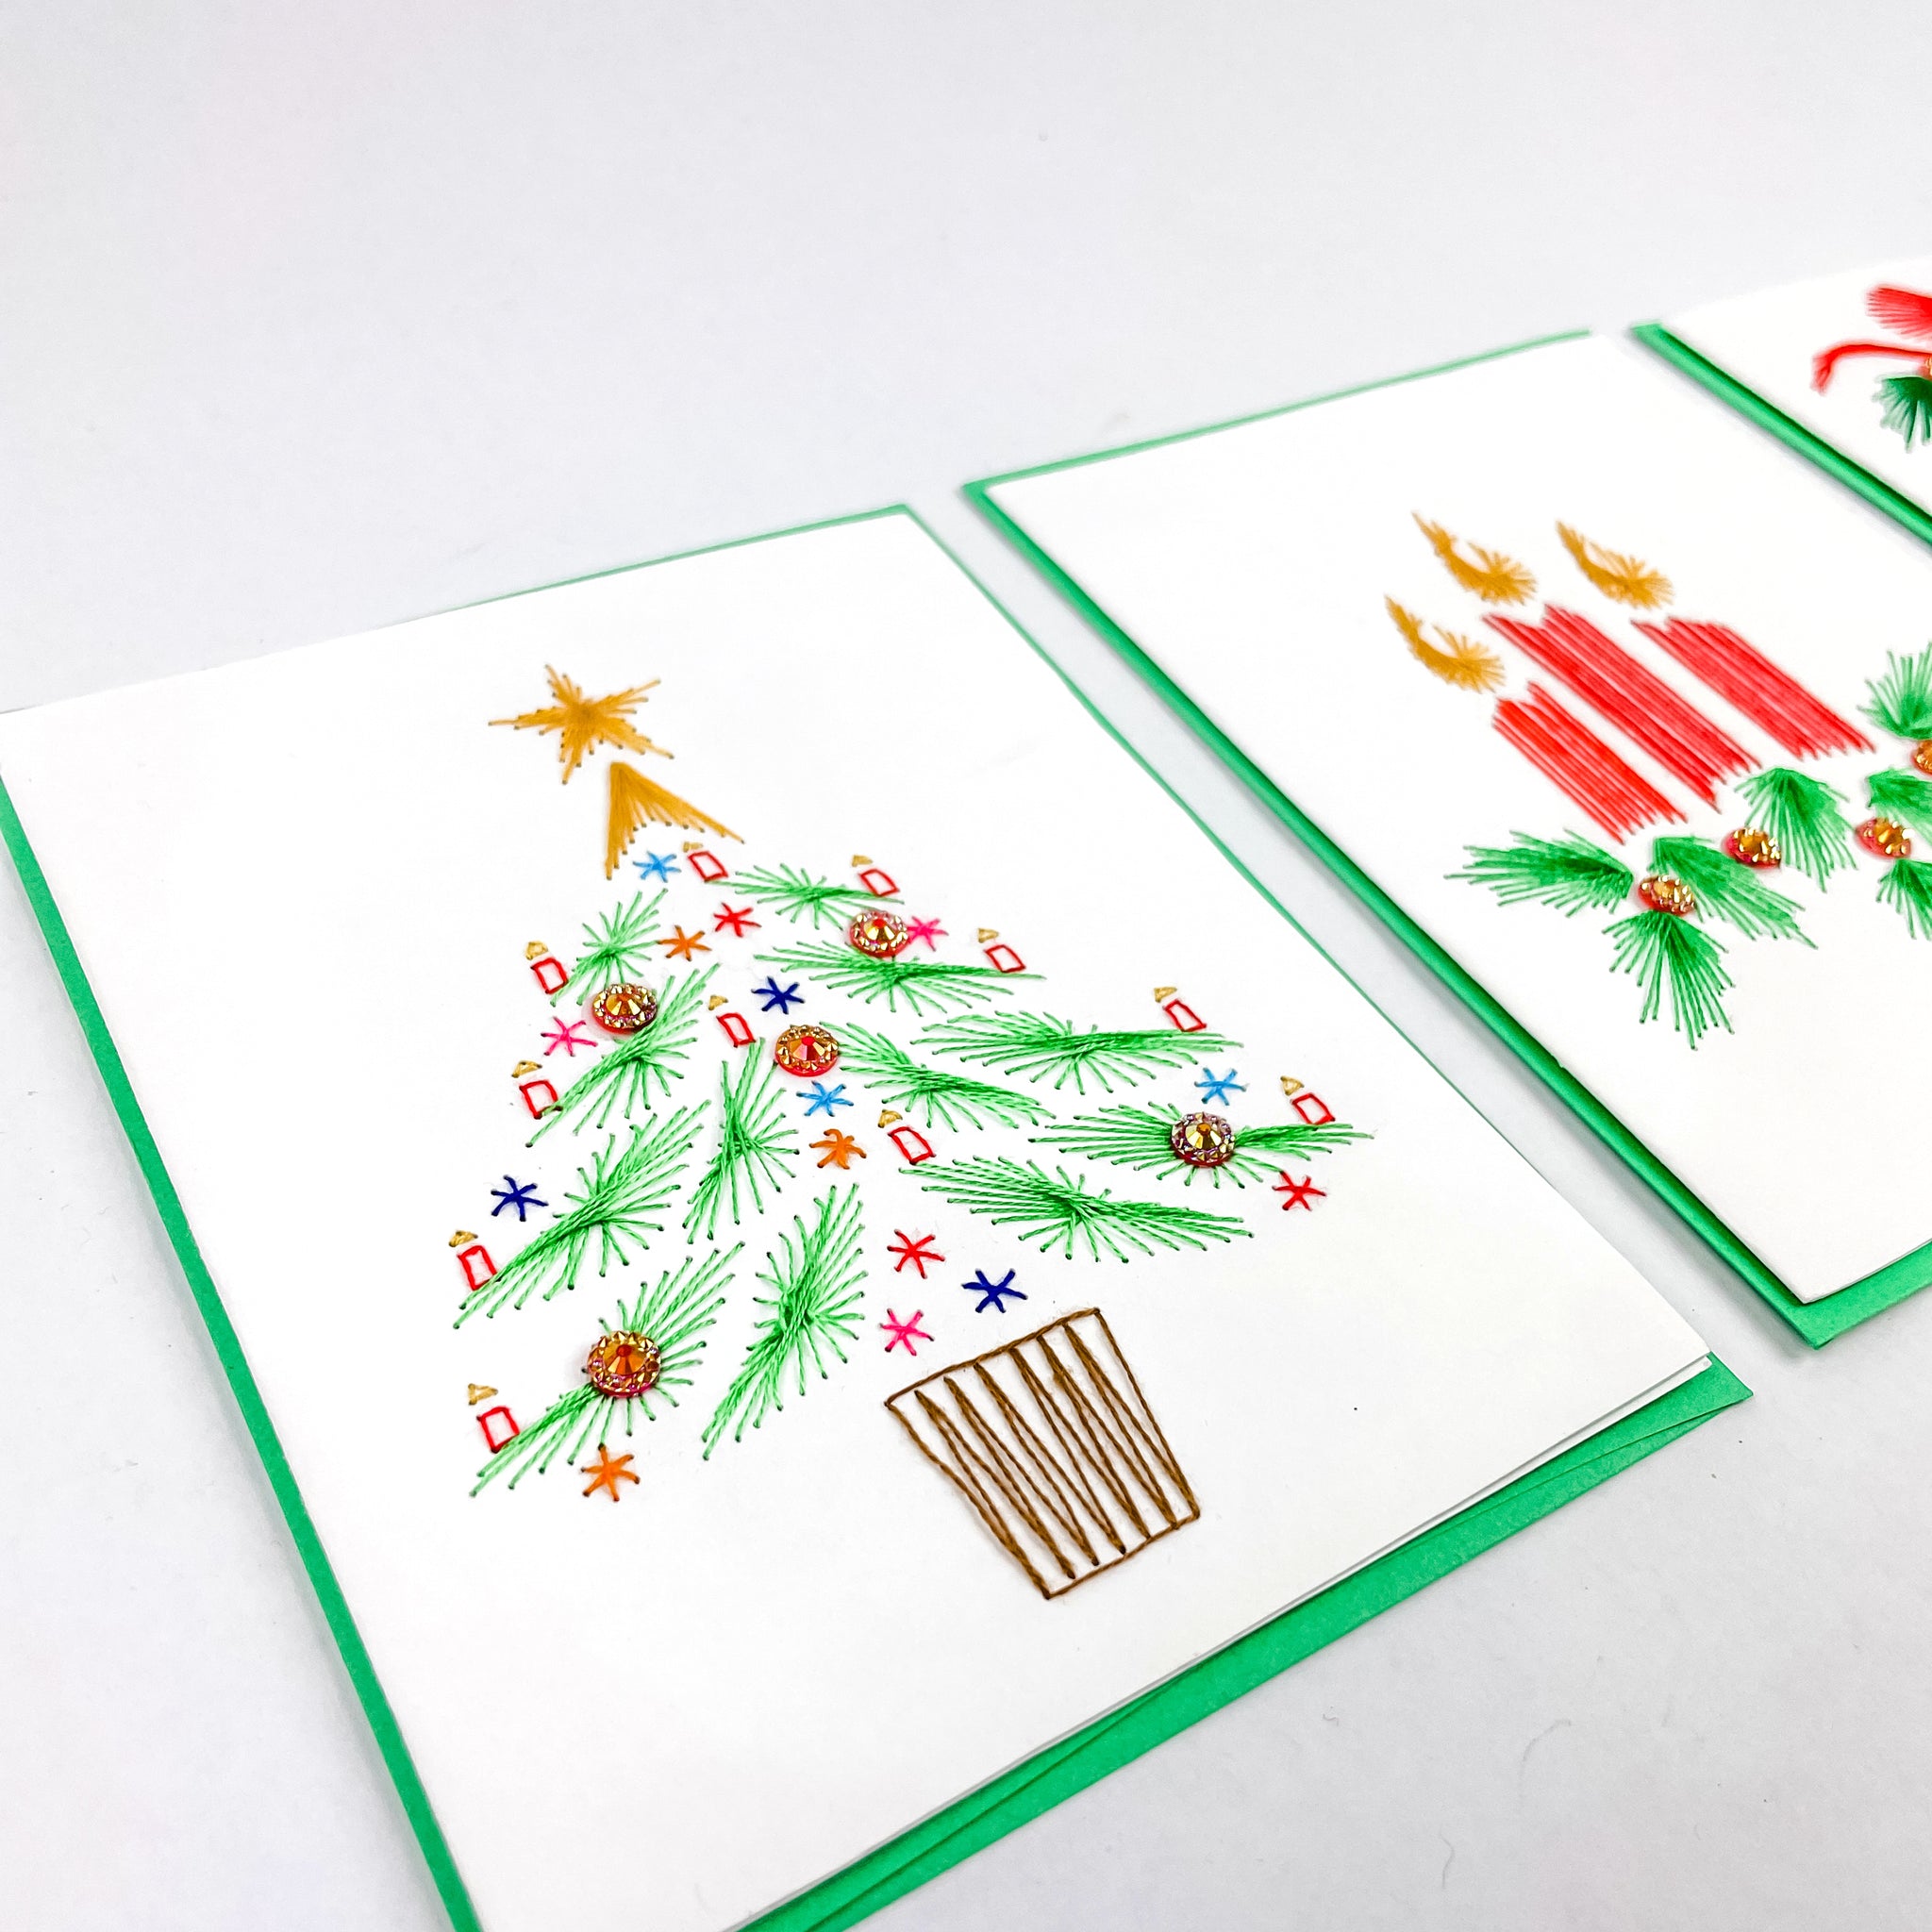 Stitched Christmas Tree Card - FMSCMarketplace.org